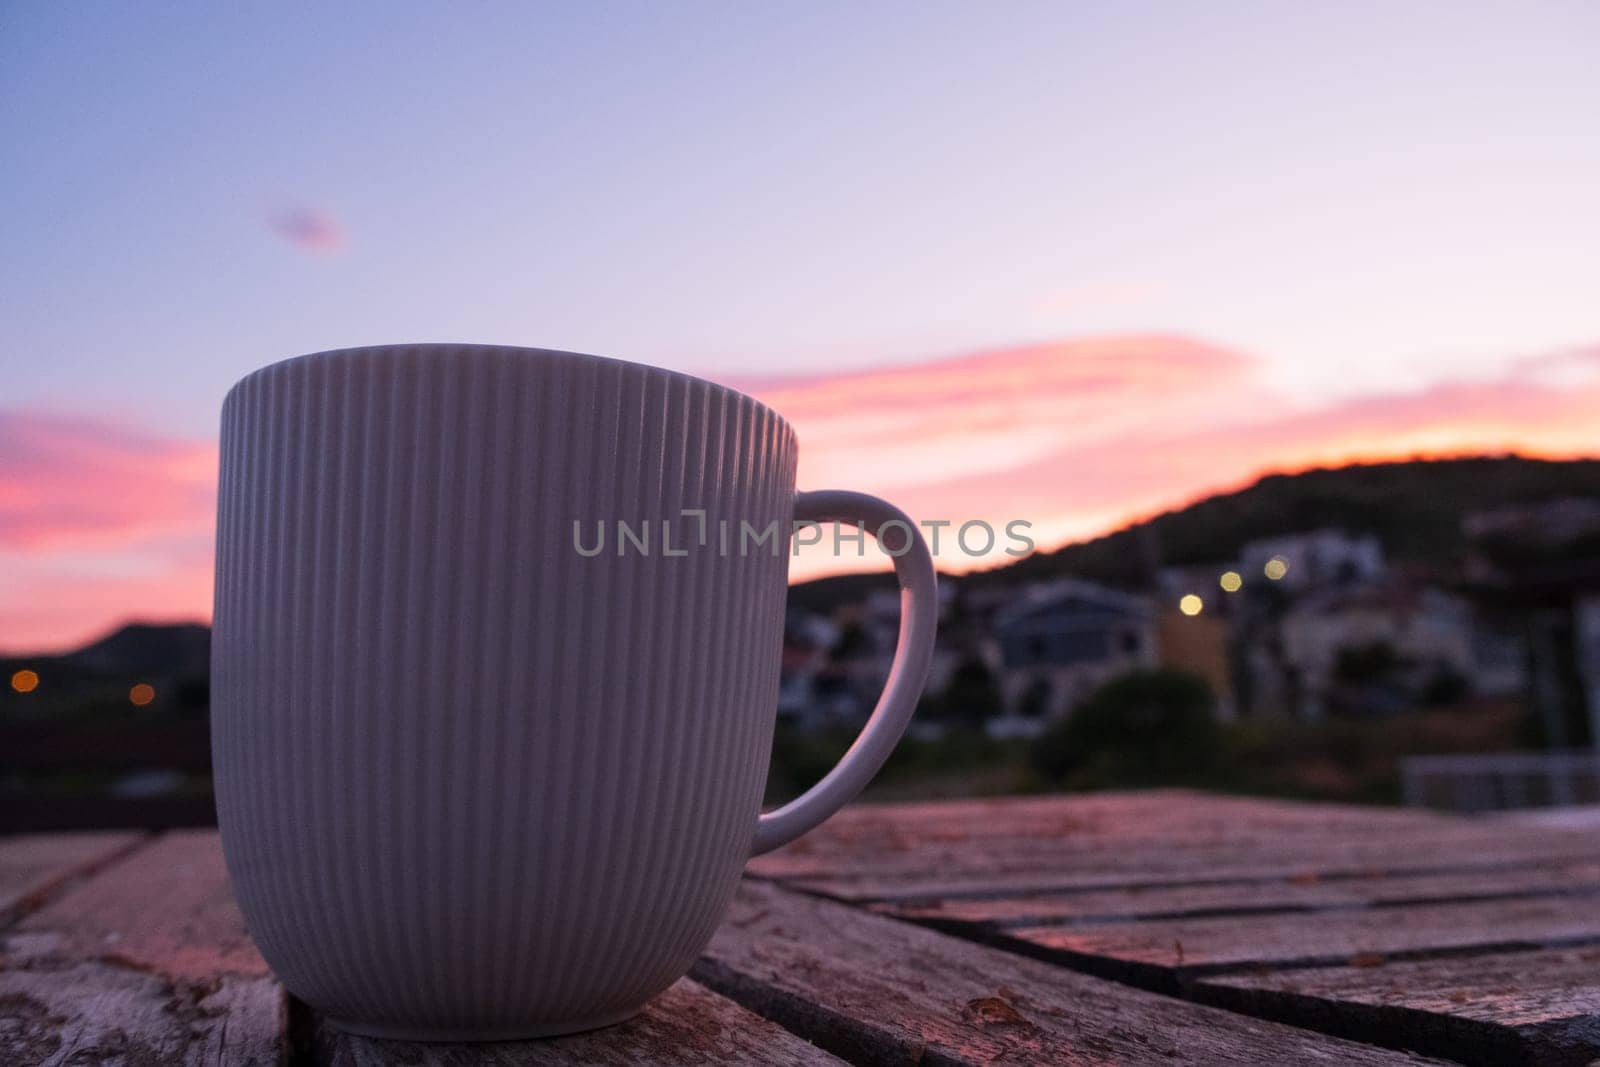 As the sun sets, a coffee cup is placed on a wooden table against a backdrop of the colorful sky. The serene landscape is enhanced by the simple beauty of the tableware